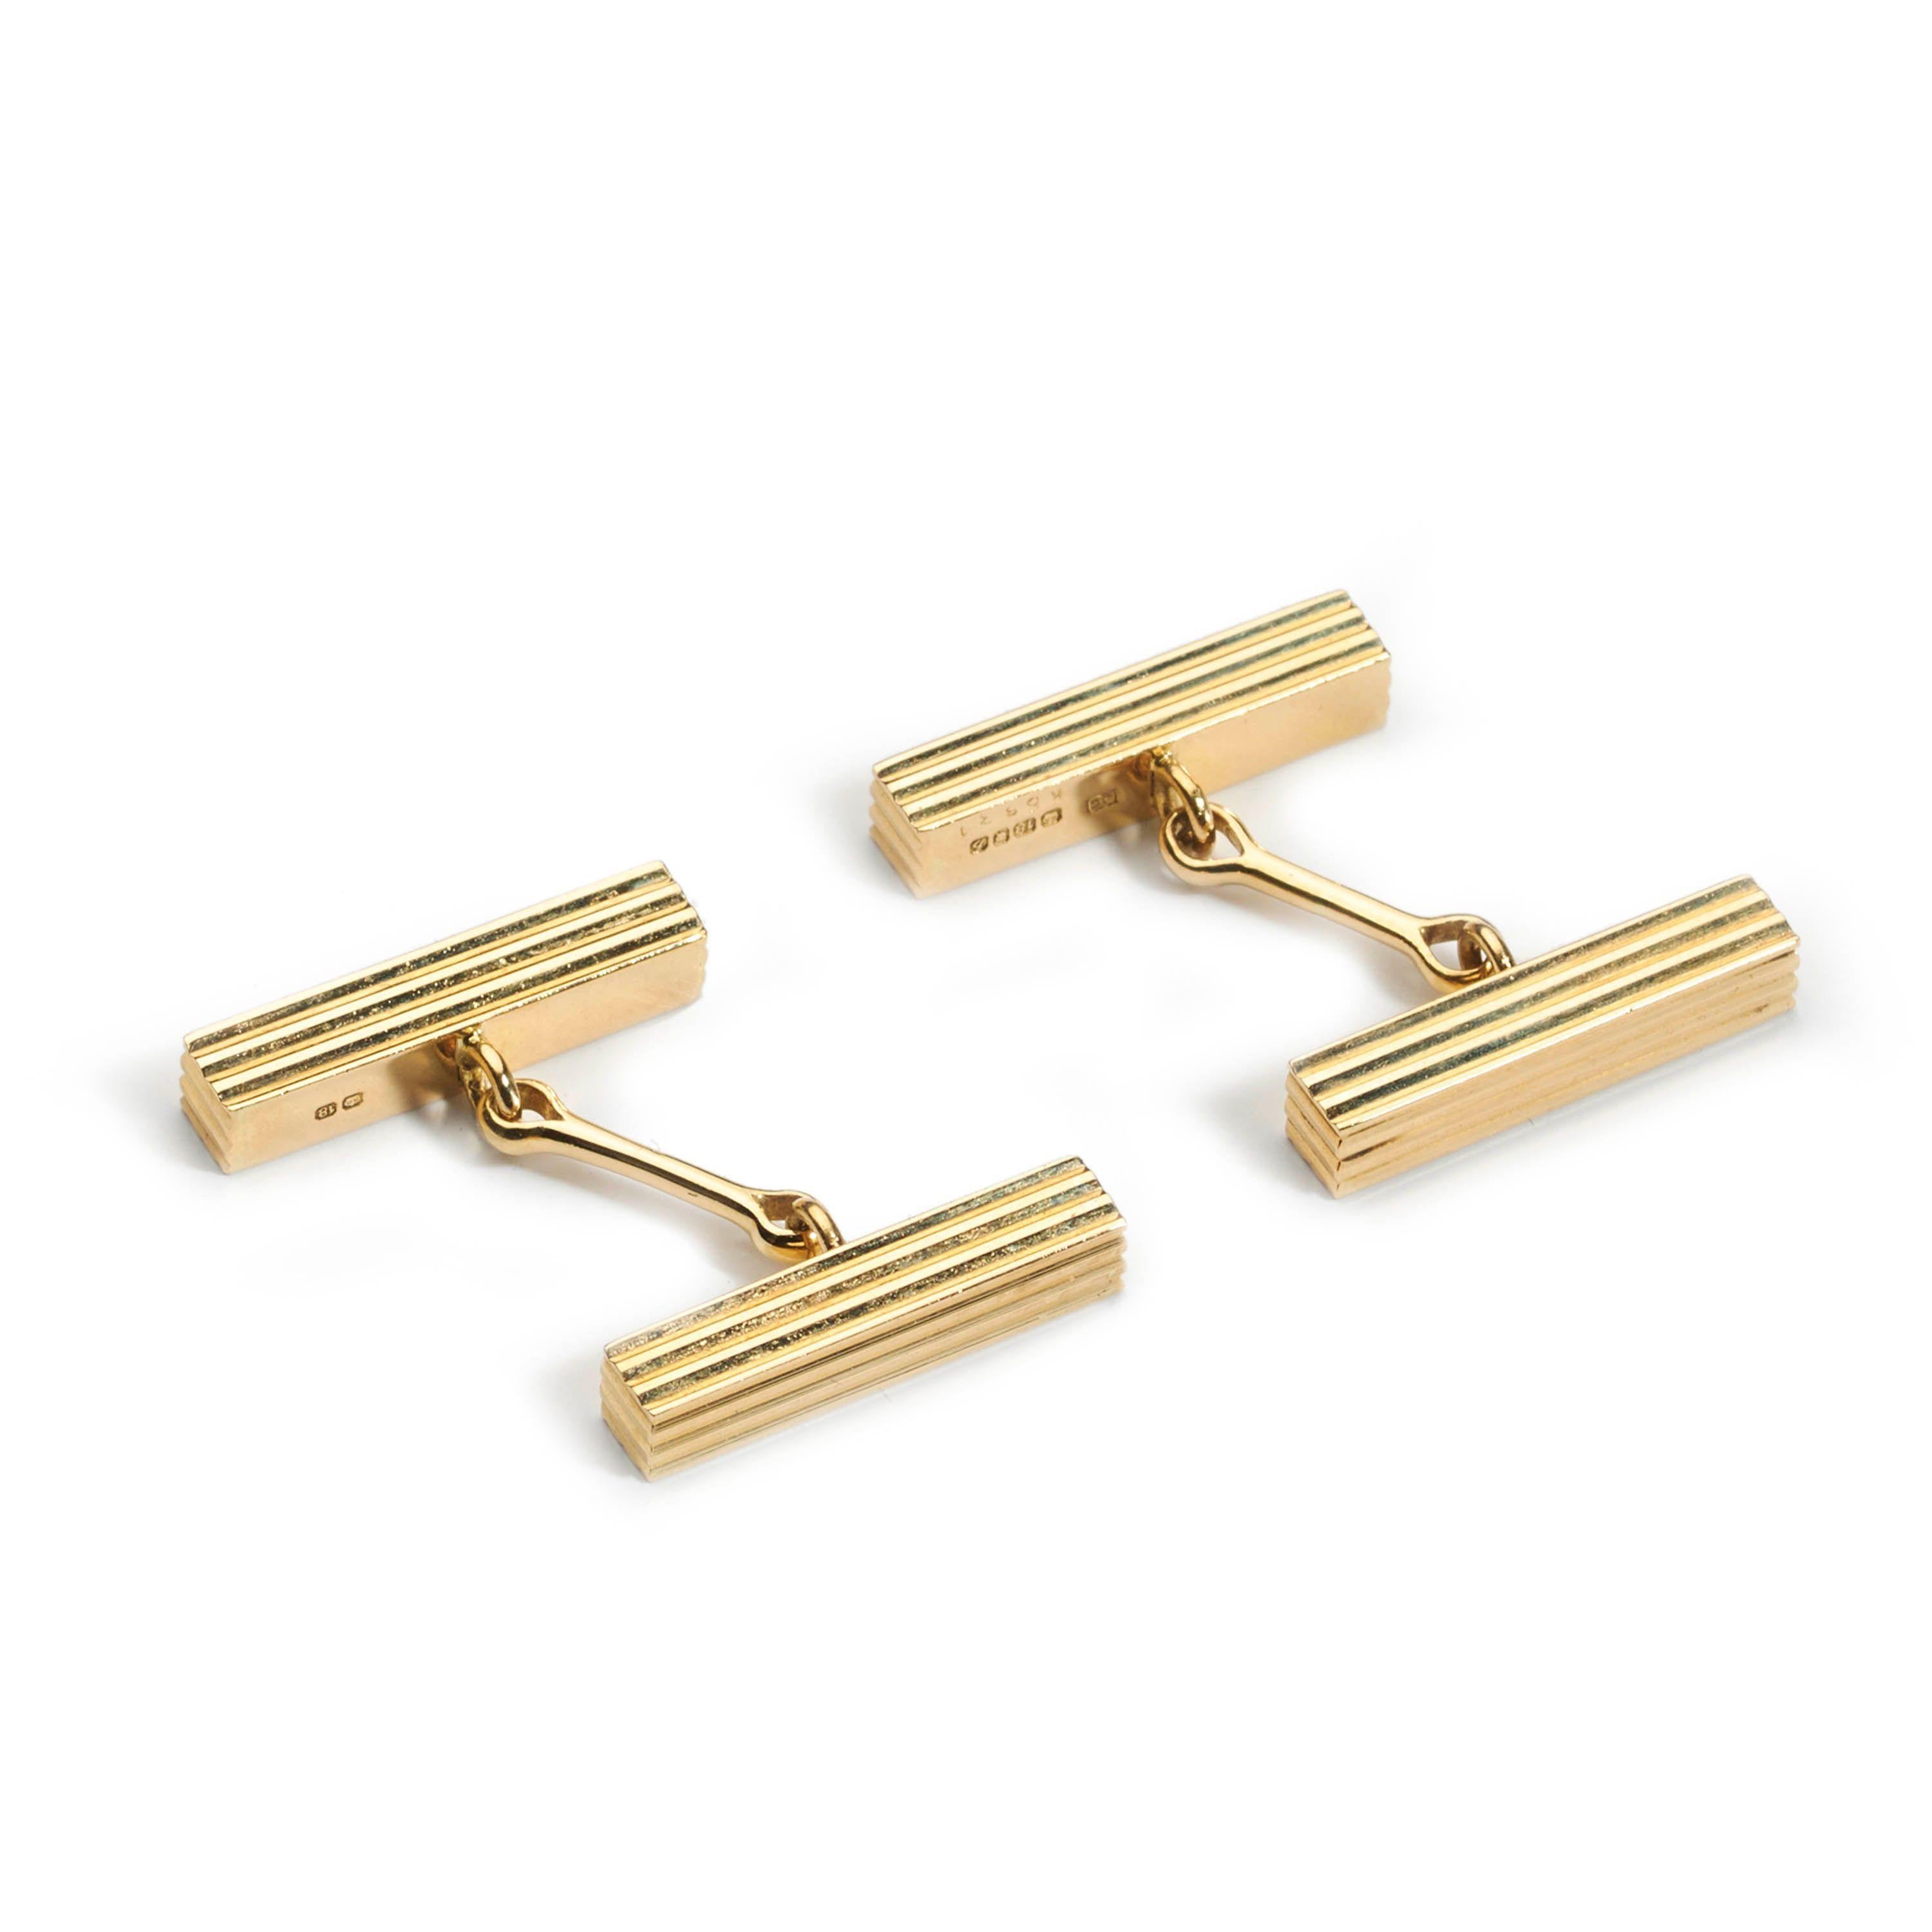 A pair of vintage, Cartier London, 18ct yellow gold, reeded square cross section, bar cufflinks, signed Cartier, numbered K6831, with JC maker's mark and London Hallmark for 1957, with bar fittings, in their original, Cartier signed, fitted, red epi